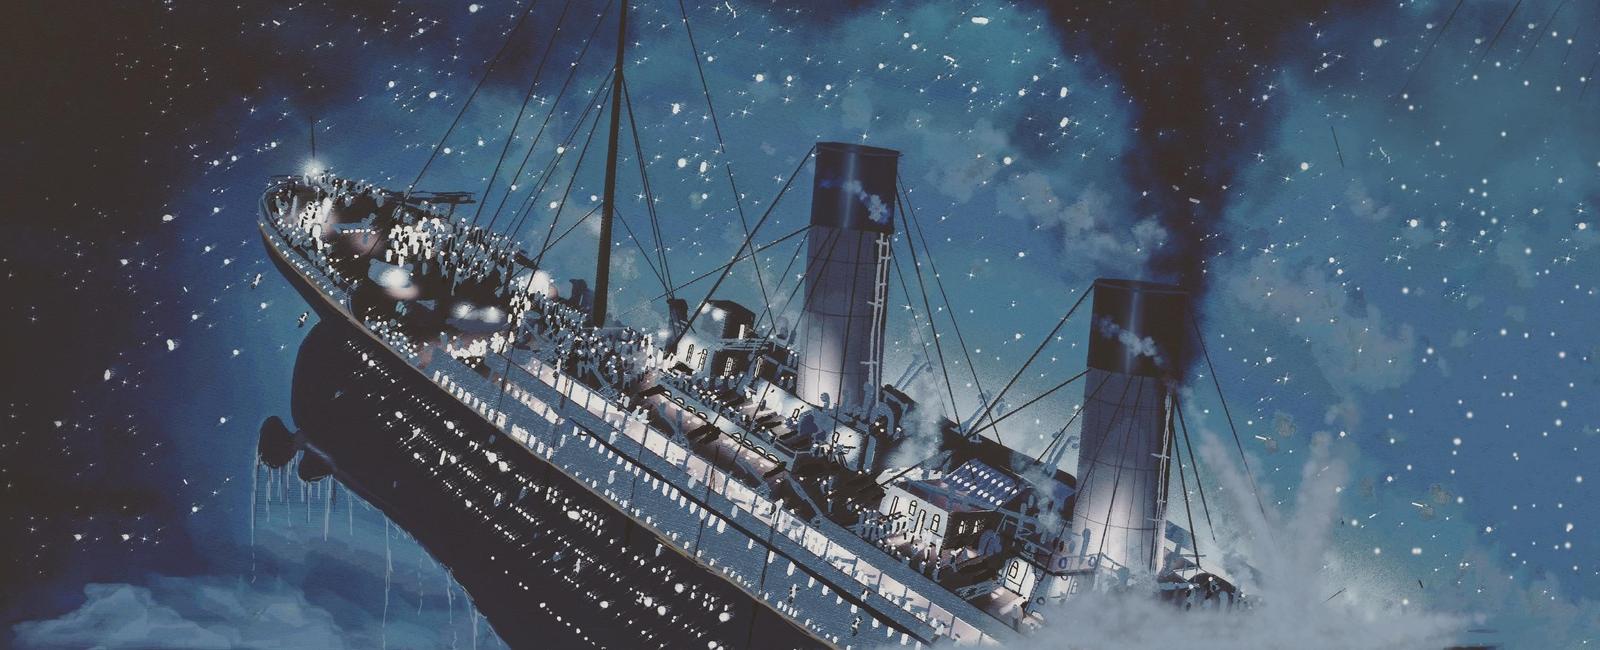 titanic has a total length of two hours and forty minutes the exact time it took for titanic to sink also the collision with the iceberg reportedly lasted 37 seconds which is how long the collision scene is in the movie